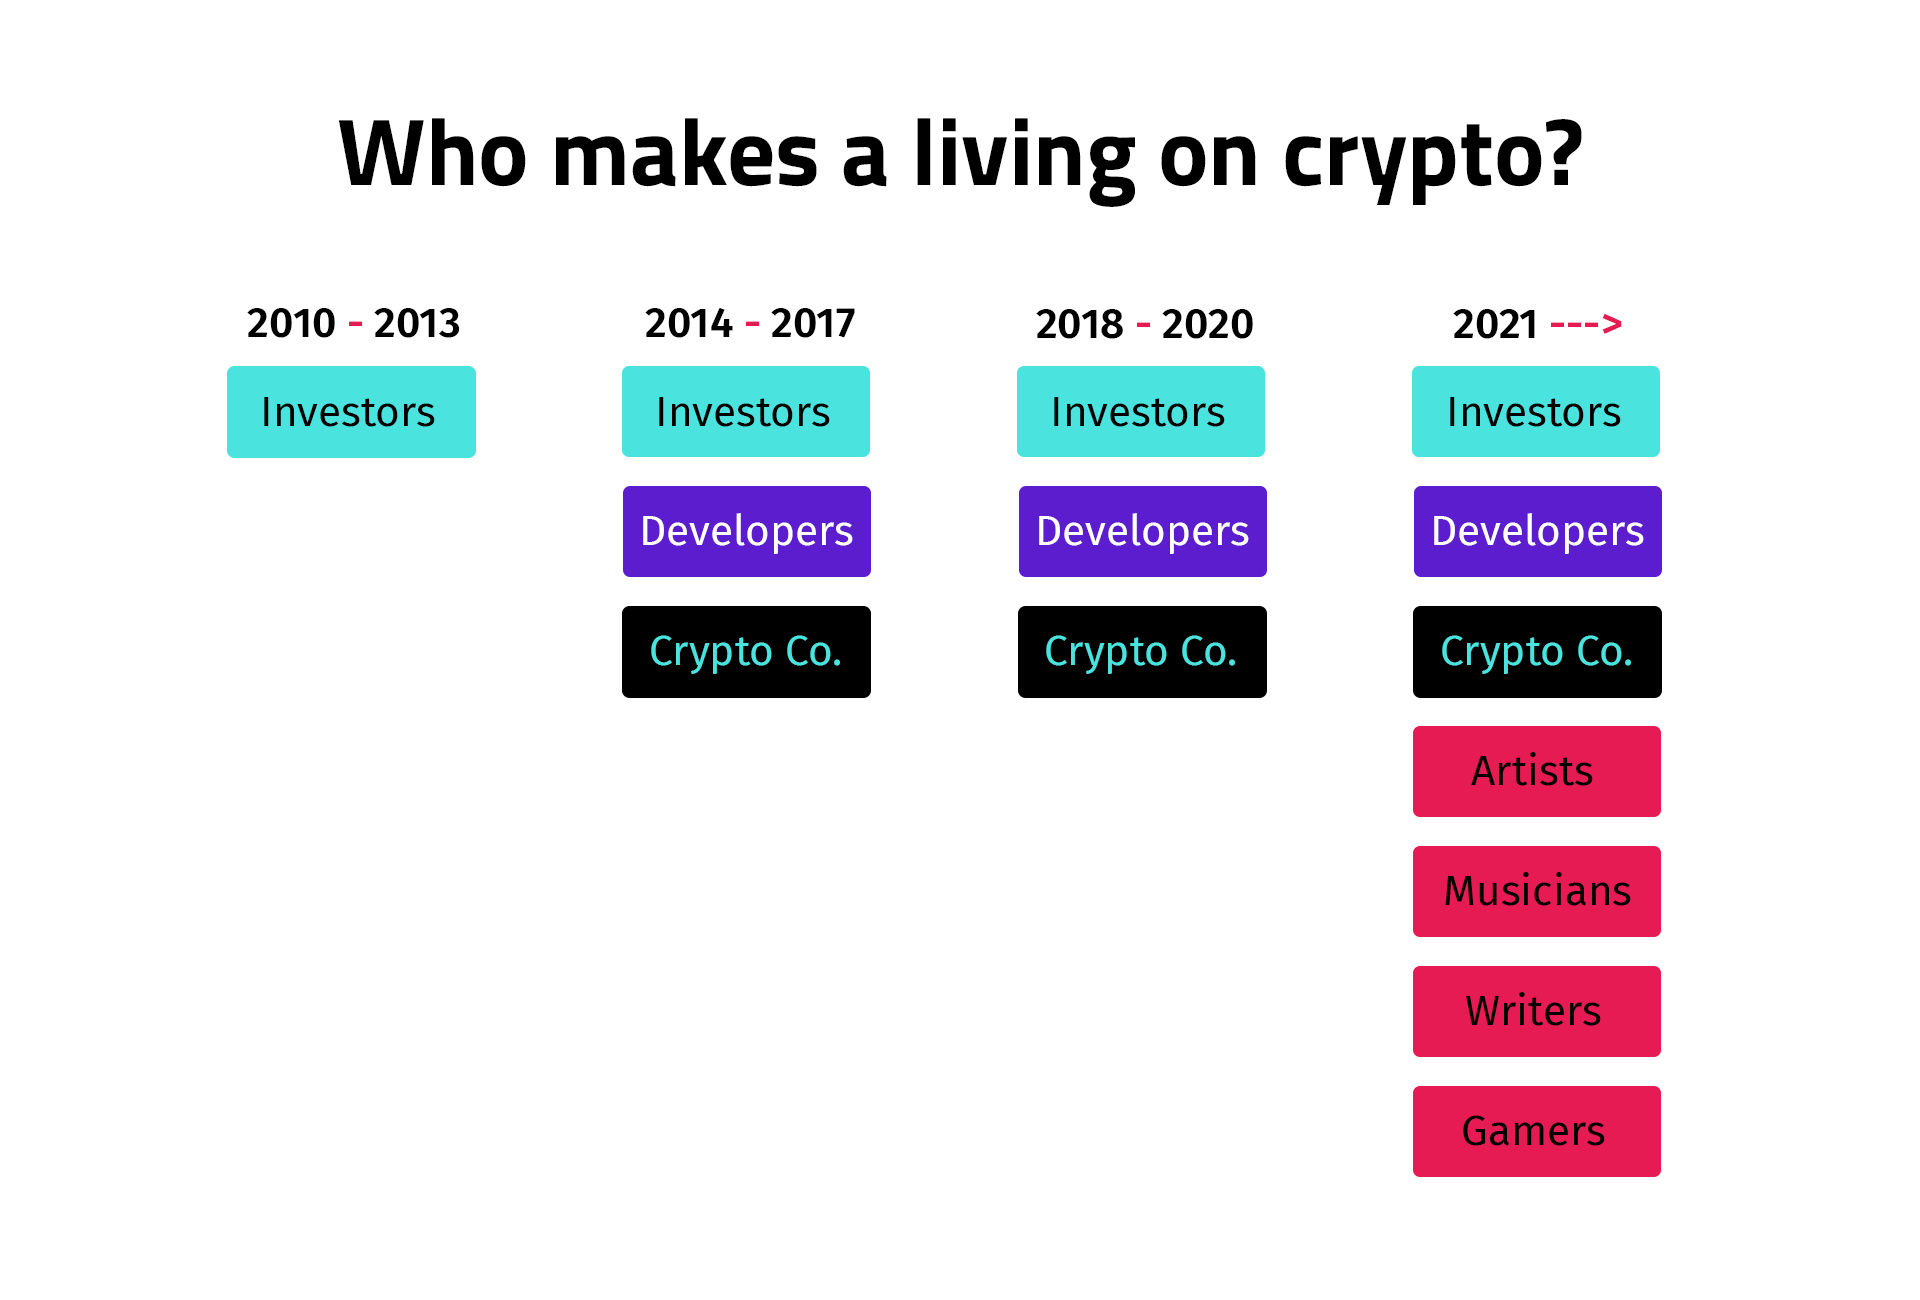 Who makes a living in crypto?